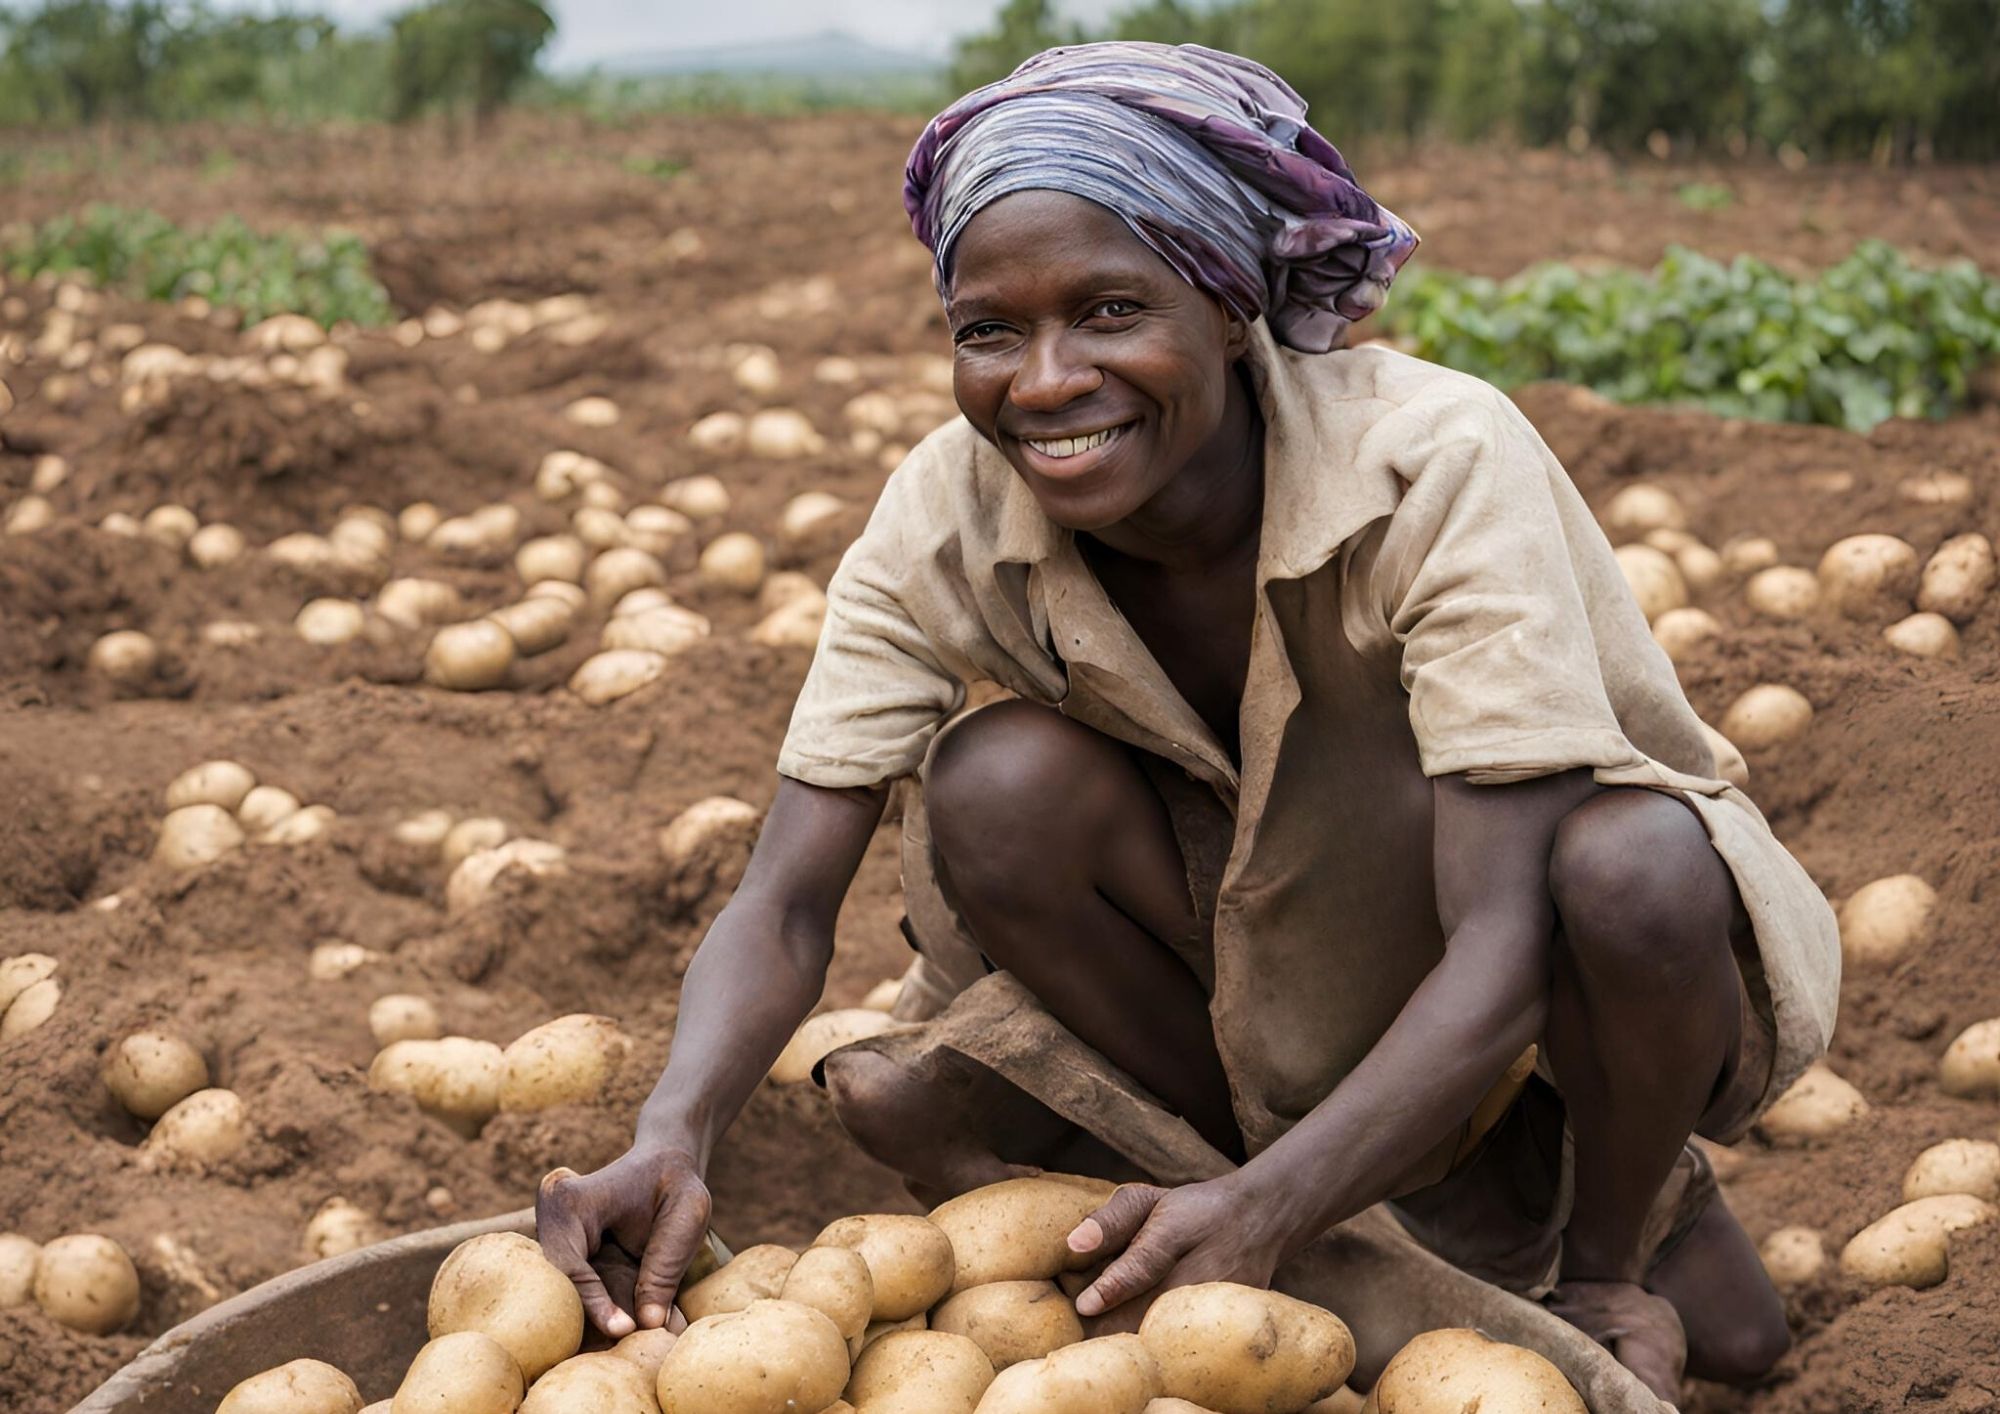 Potatoes and nutrition, a vital inseparable combination